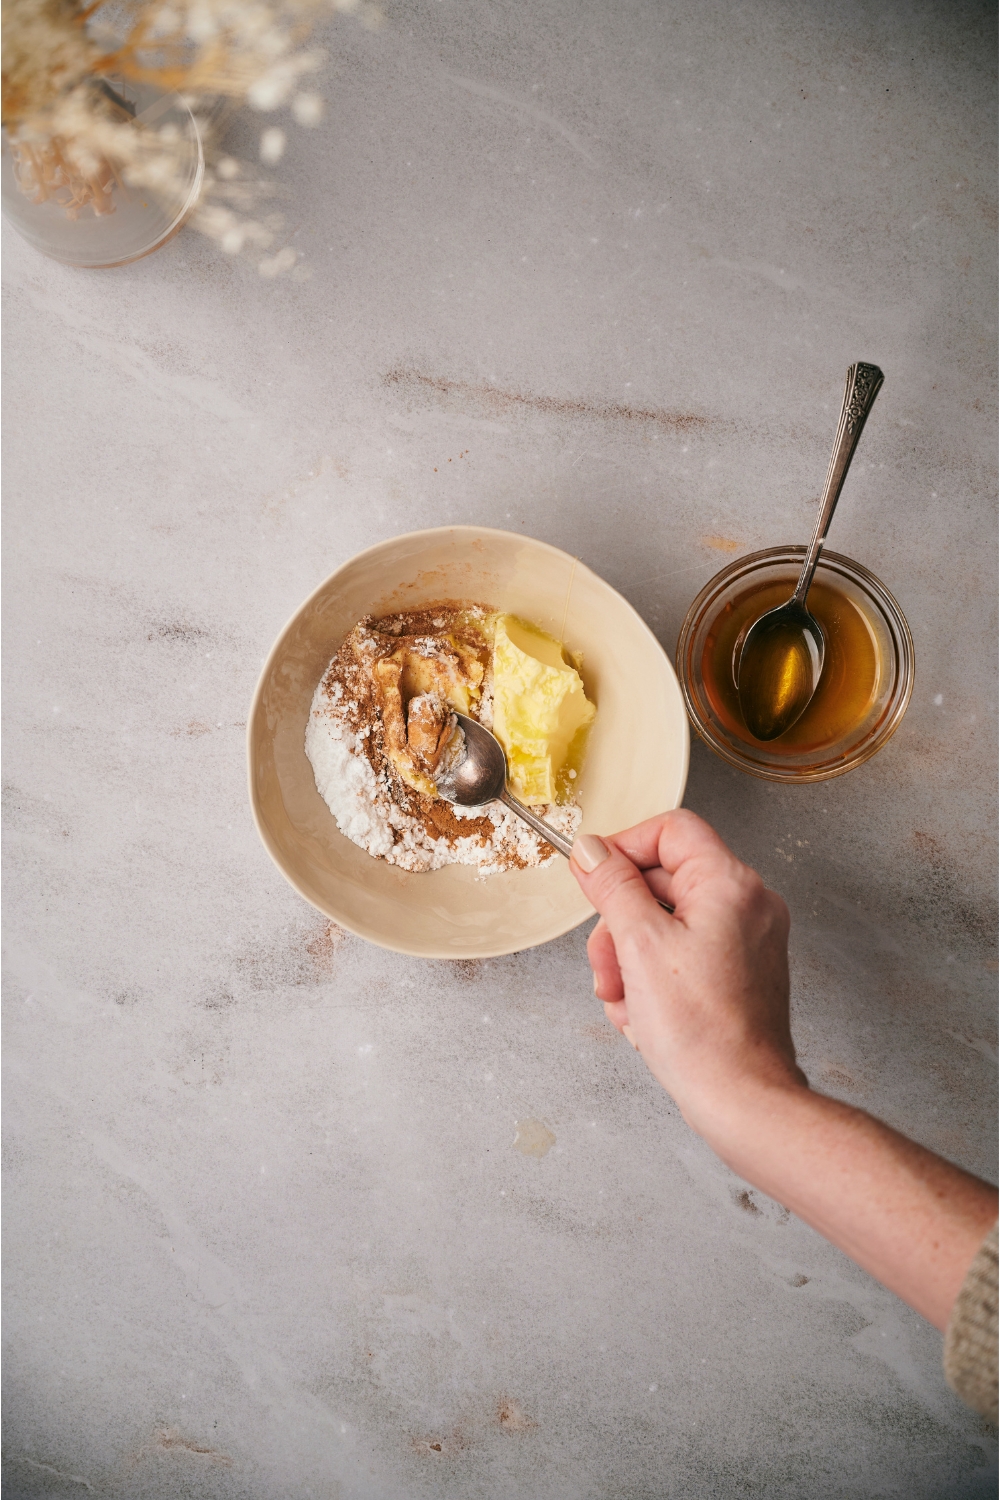 A hand mixing butter, cinnamon, honey, and powdered sugar together with a spoon, next to a small bowl of honey.